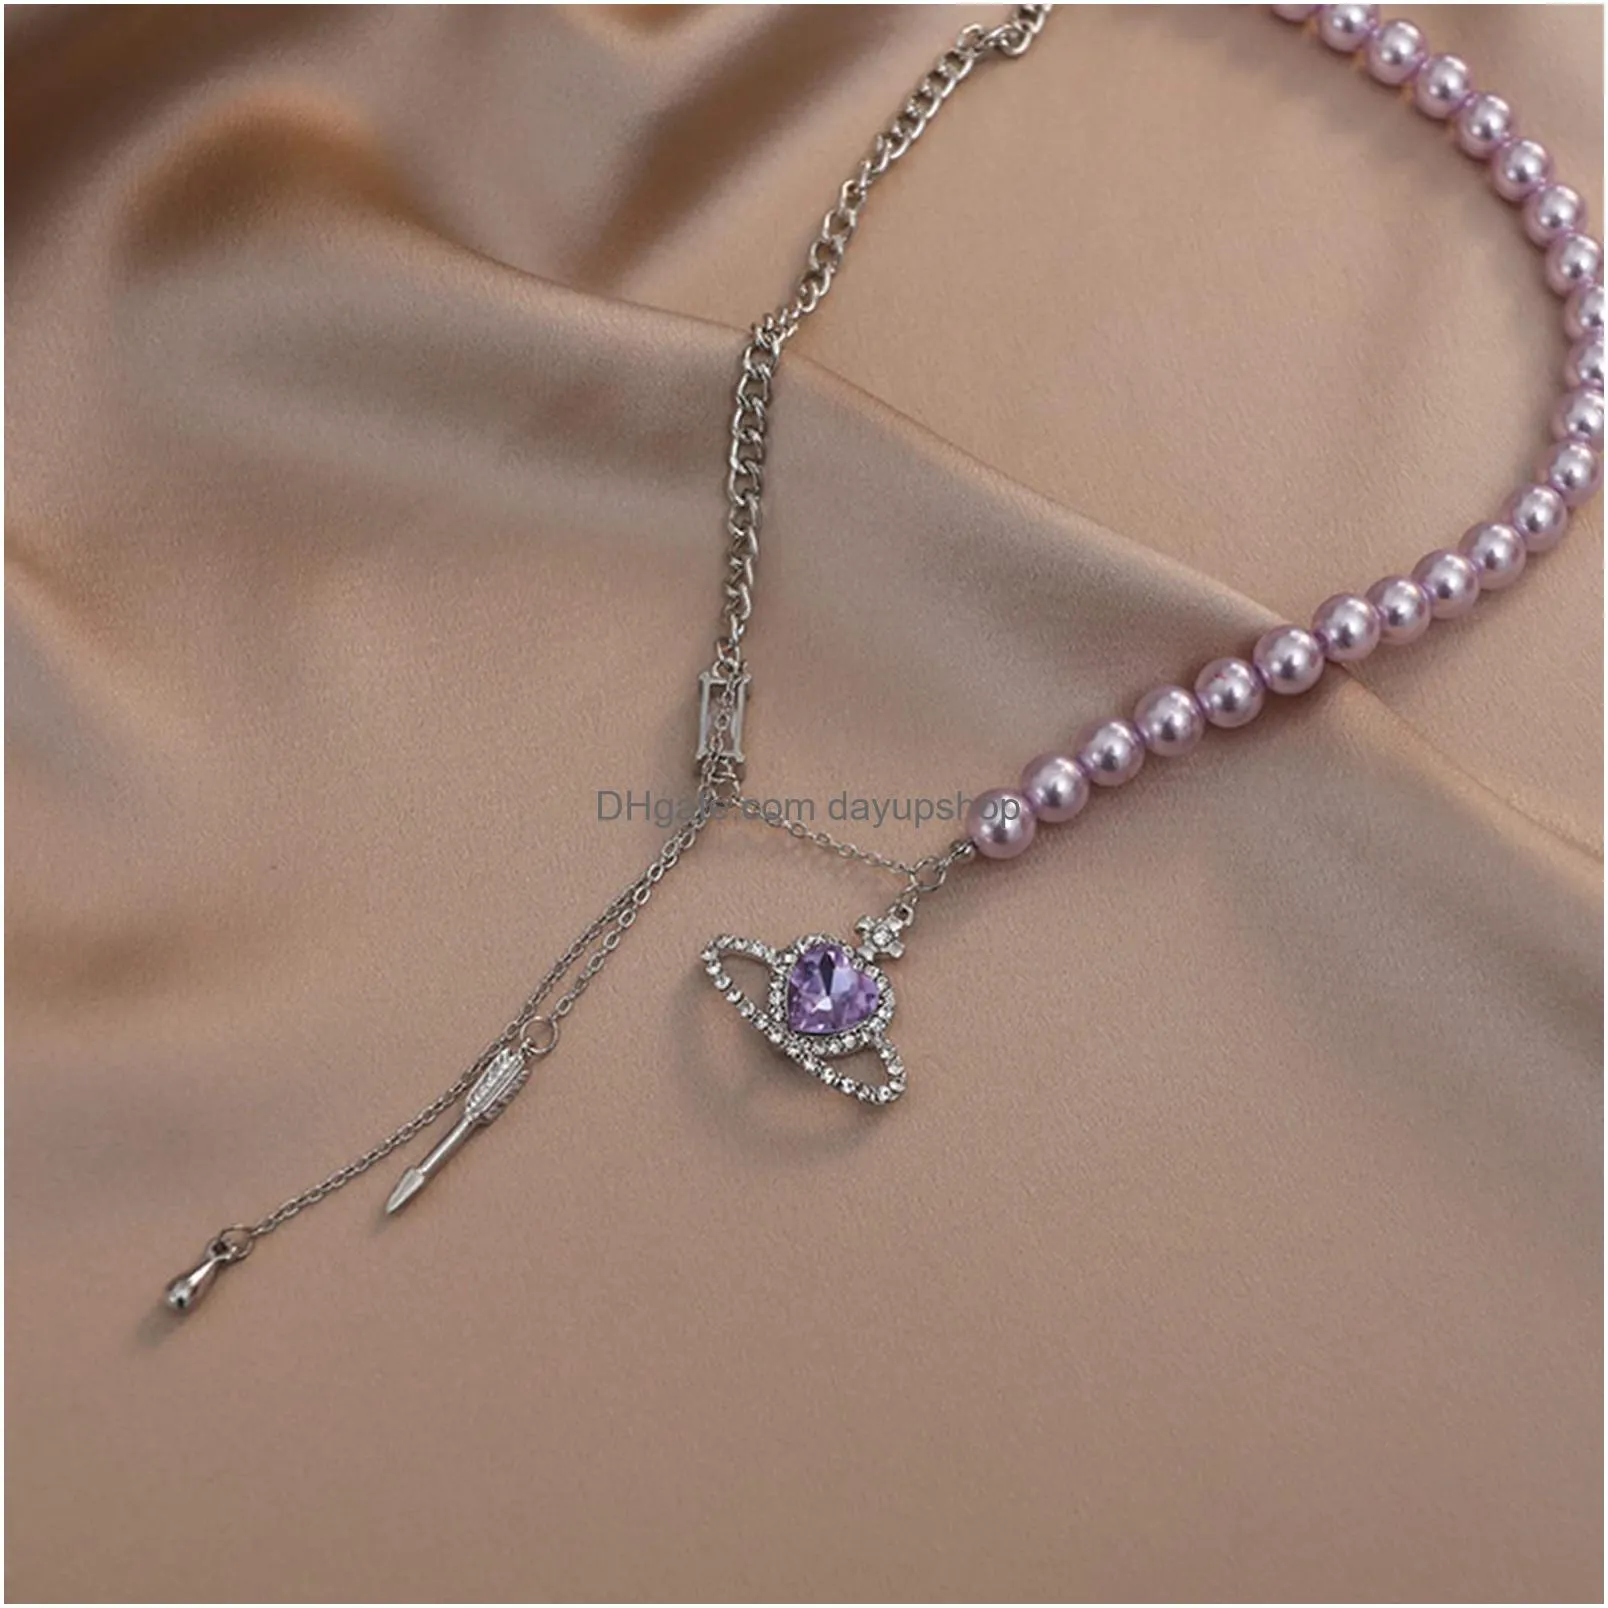 Stylish Pearl Necklace Set by Vivienne Westwood